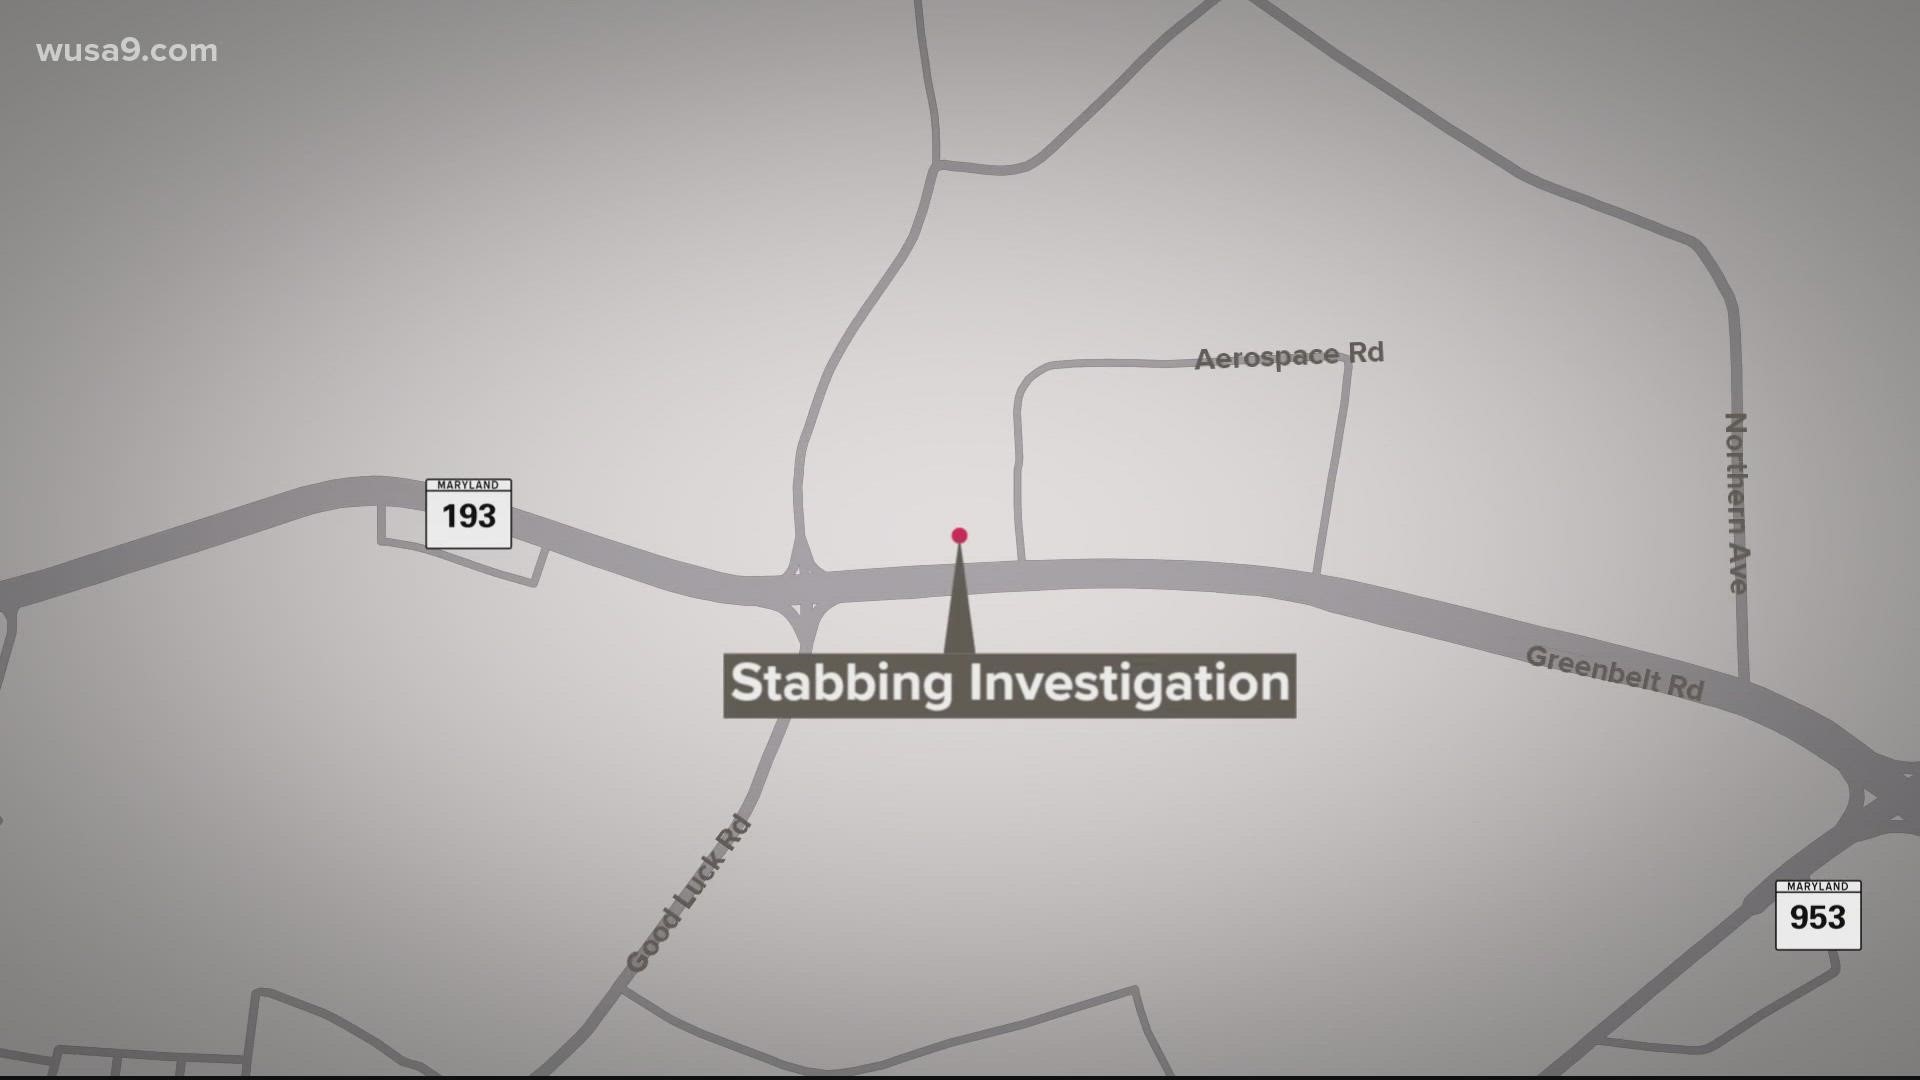 A man was found with stab wounds inside a apartment in Lanham. He died at the scene.